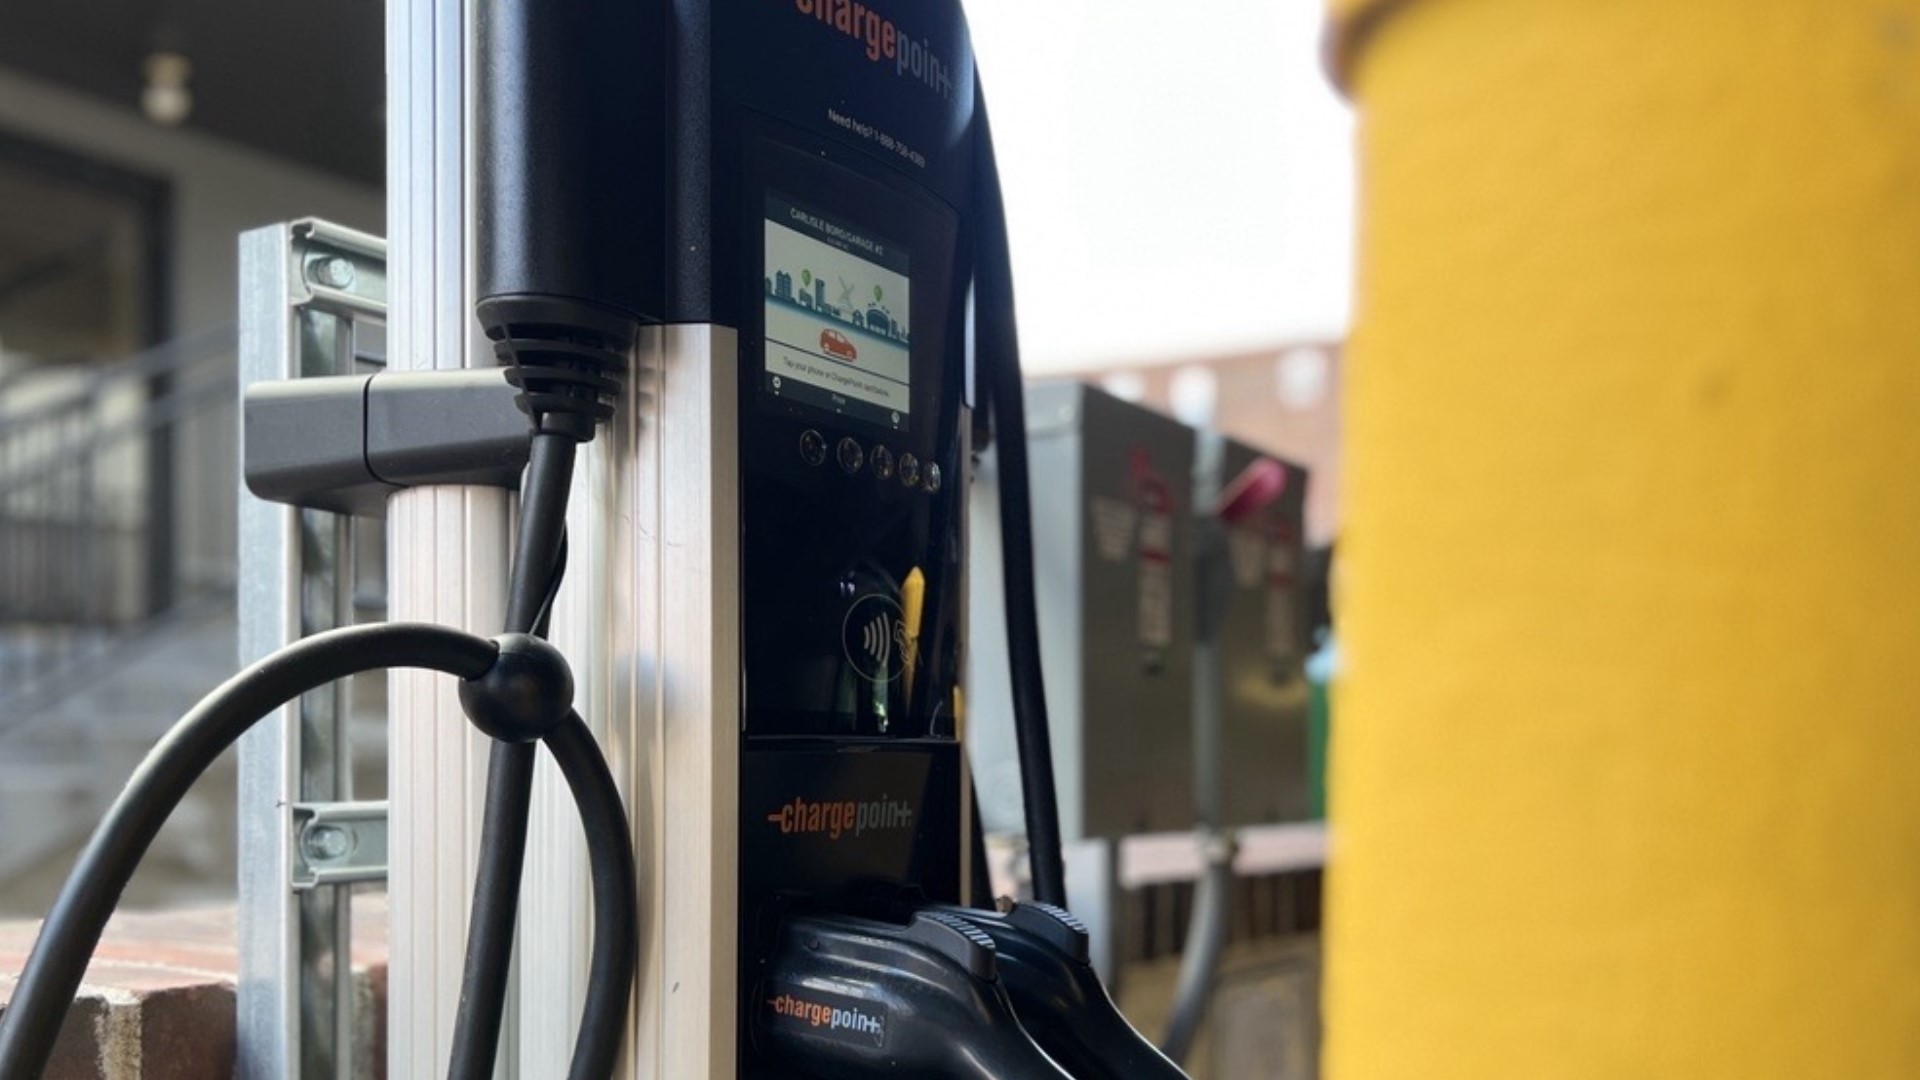 Carlisle just opened up two borough-owned charging stations in a pilot program to help determine future EV projects.